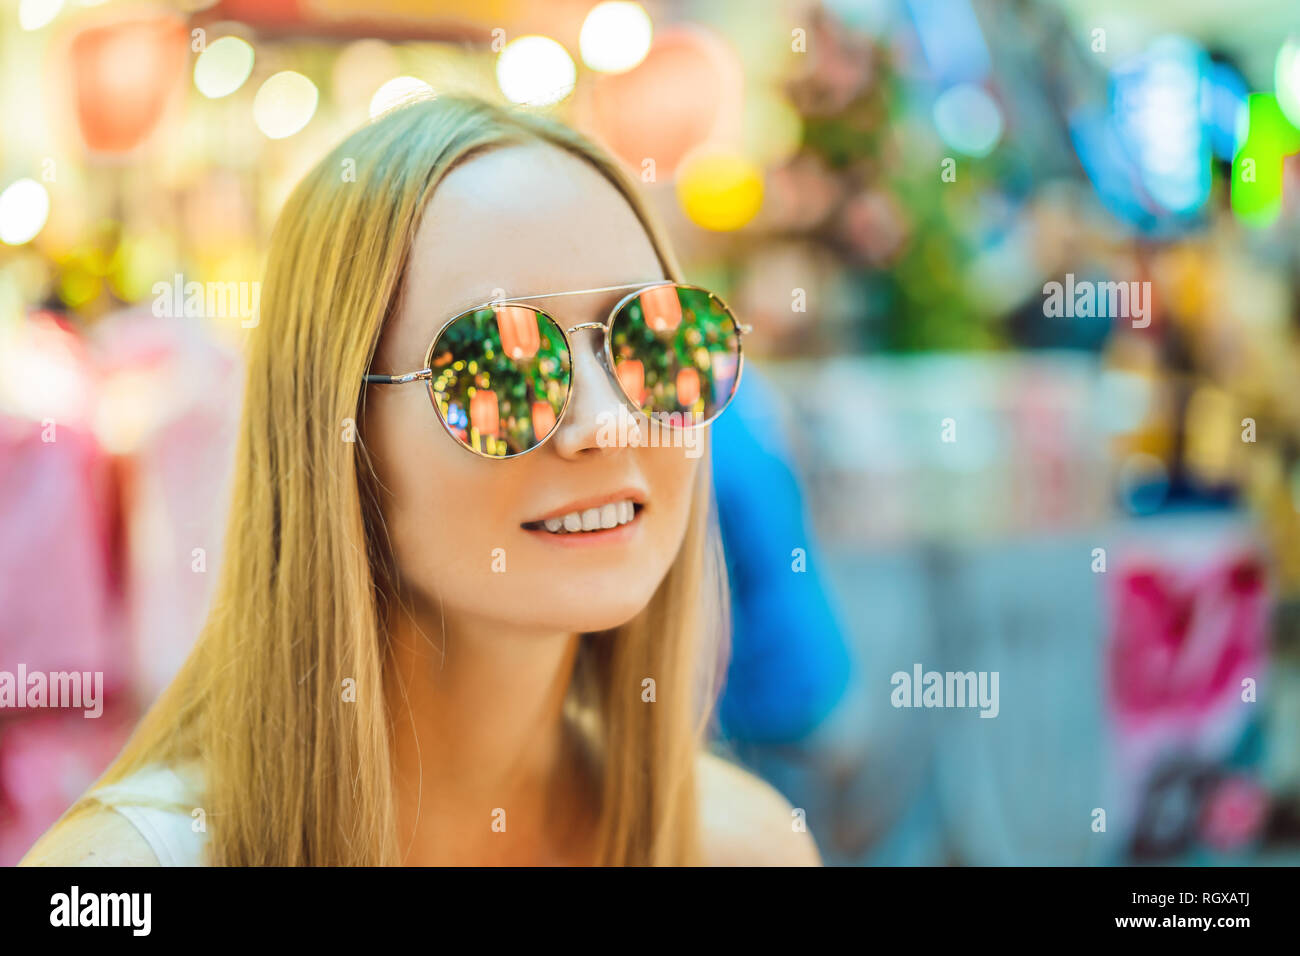 Woman celebrate Chinese New Year look at Chinese red lanterns. Chinese lanterns are reflected in glasses Stock Photo